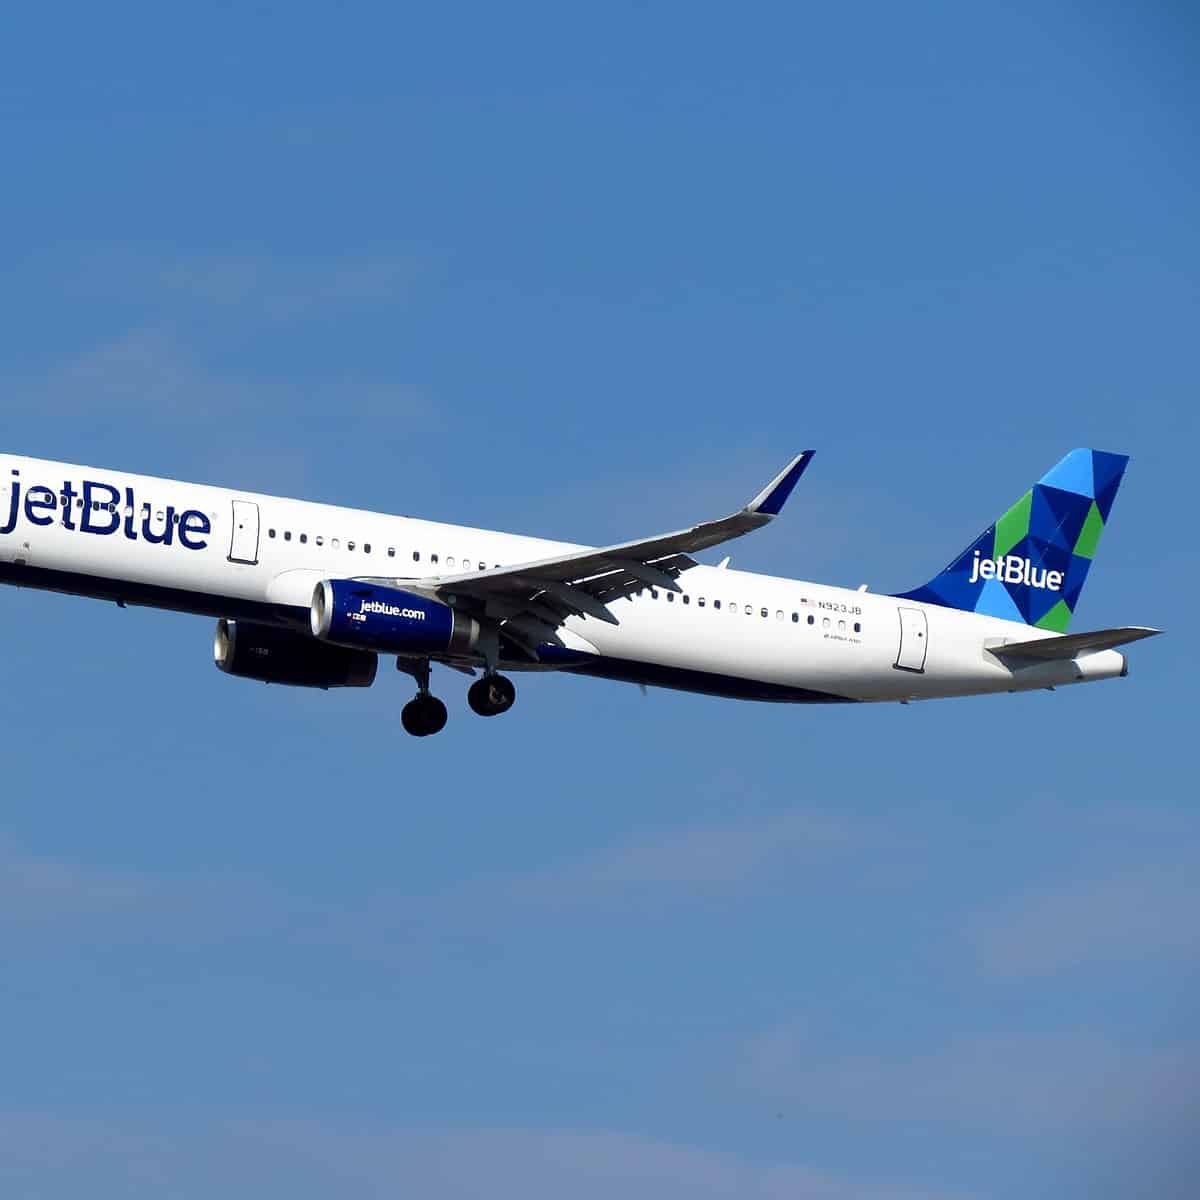 N.J. will participate in antitrust lawsuit against JetBlue Airways and Spirit Airlines over planned merger